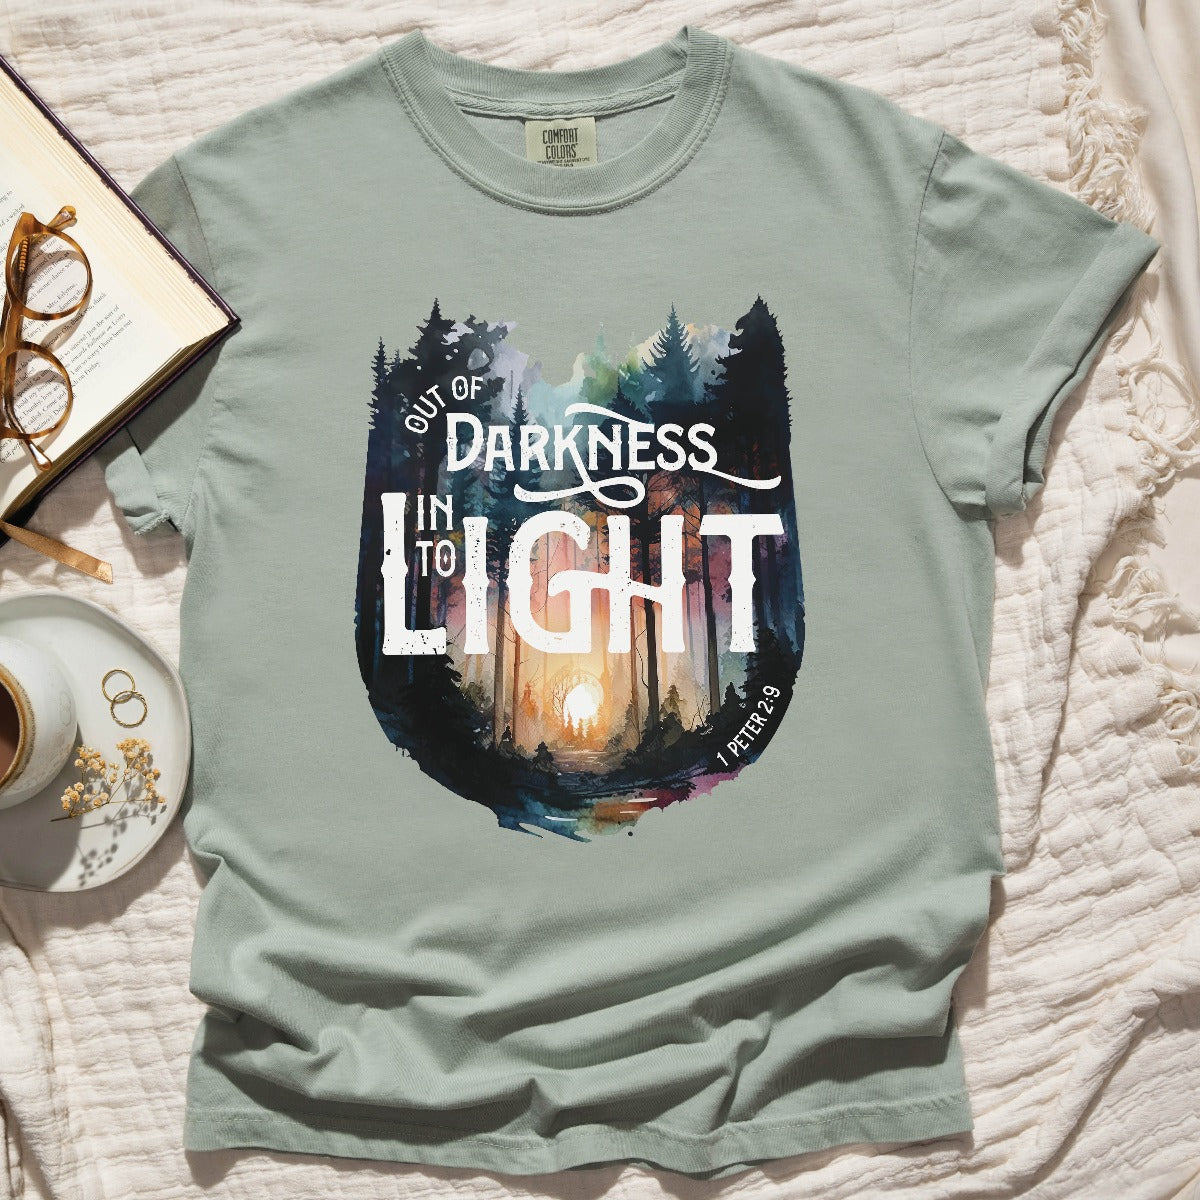 Bay light sage green color garment dyed Comfort Colors C1717 unisex faith-based Christian t-shirt with "Out of Darkness, Into Light" 1 Peter 2:9 bible verse and watercolor moody forest trees outdoor scene, designed for men and women